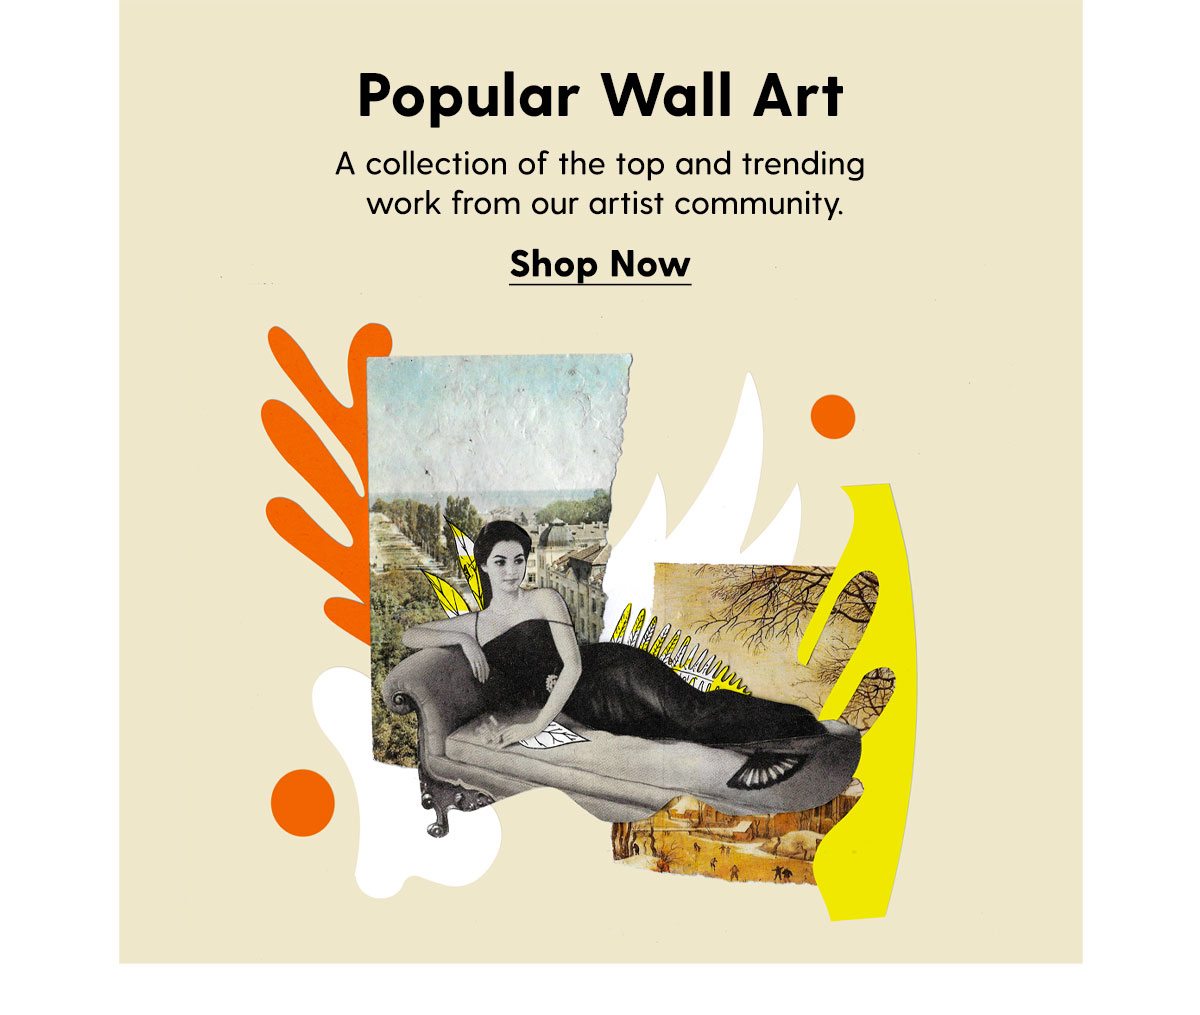 Popular Wall Art A collection of the top and trending work from our artist community. Shop Now